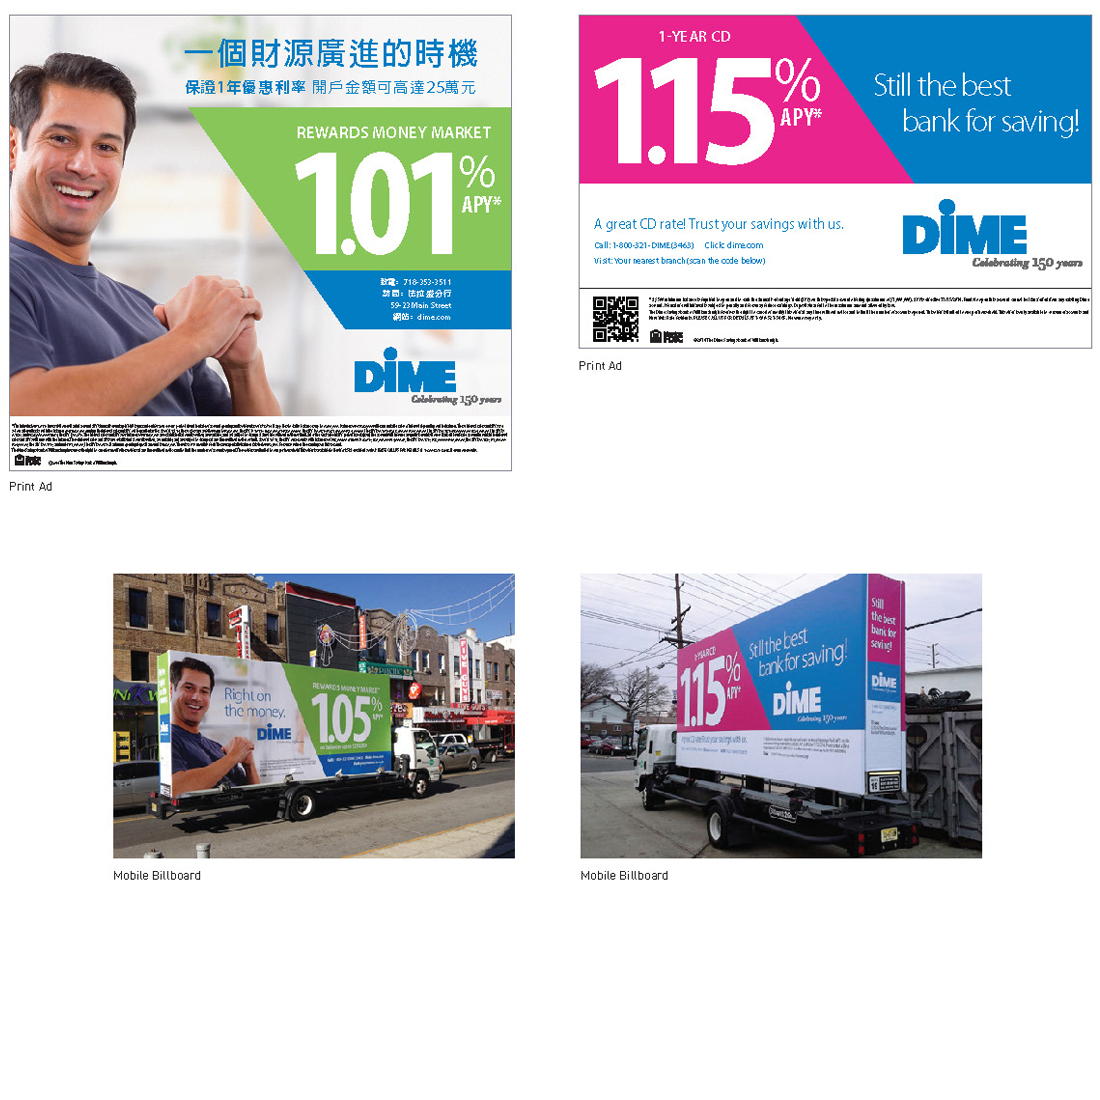 Dime Bank print ads and moblie billboards with money market and CD rates in English and Cantonese